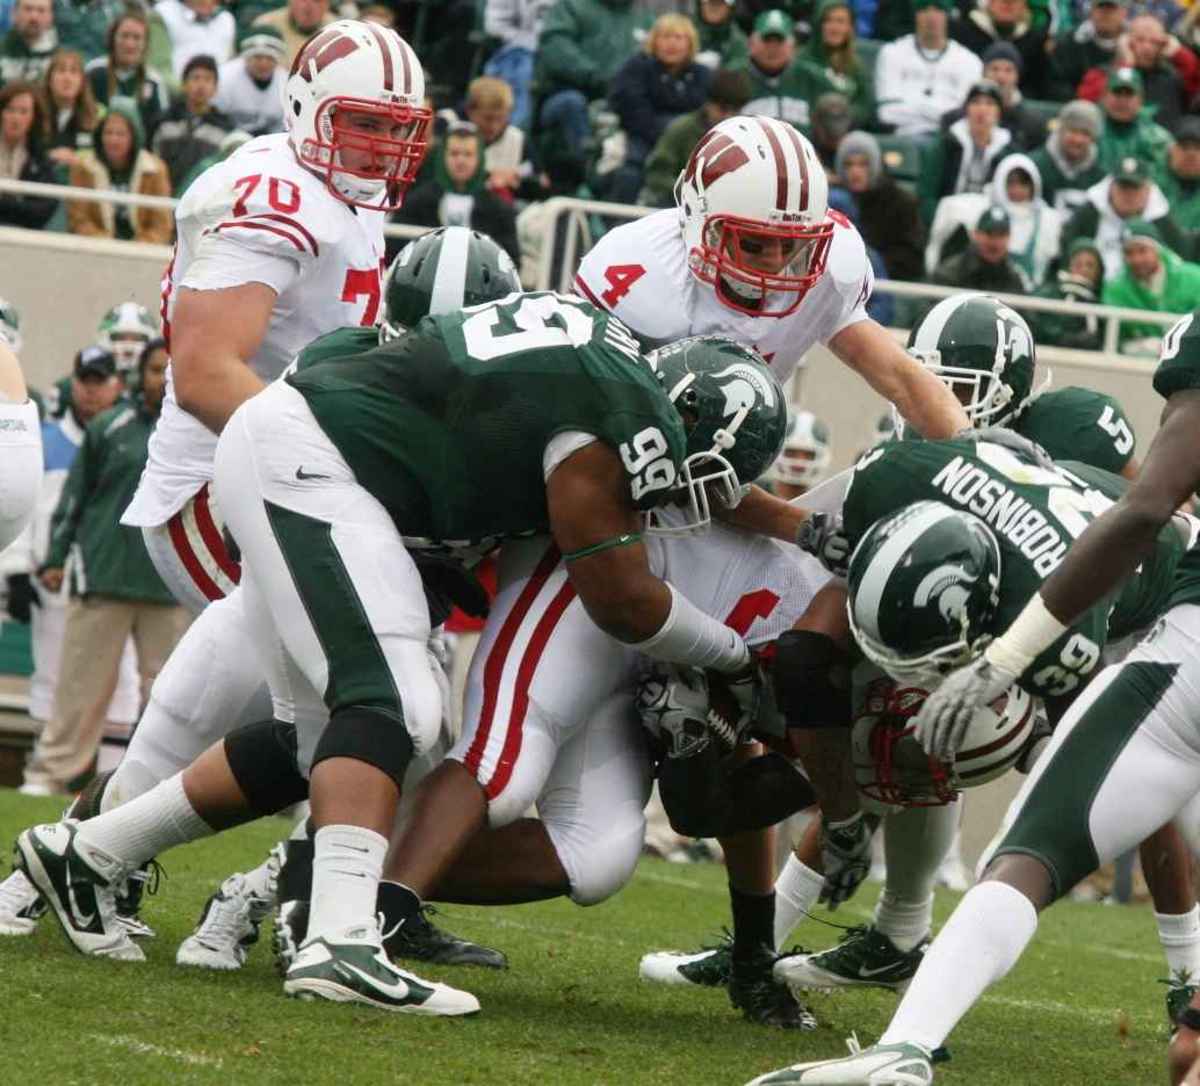 The Spartans defense must be better in 2011 for them to repeat as Big Ten Champs.  Photo courtesy of Bill Marklevits.